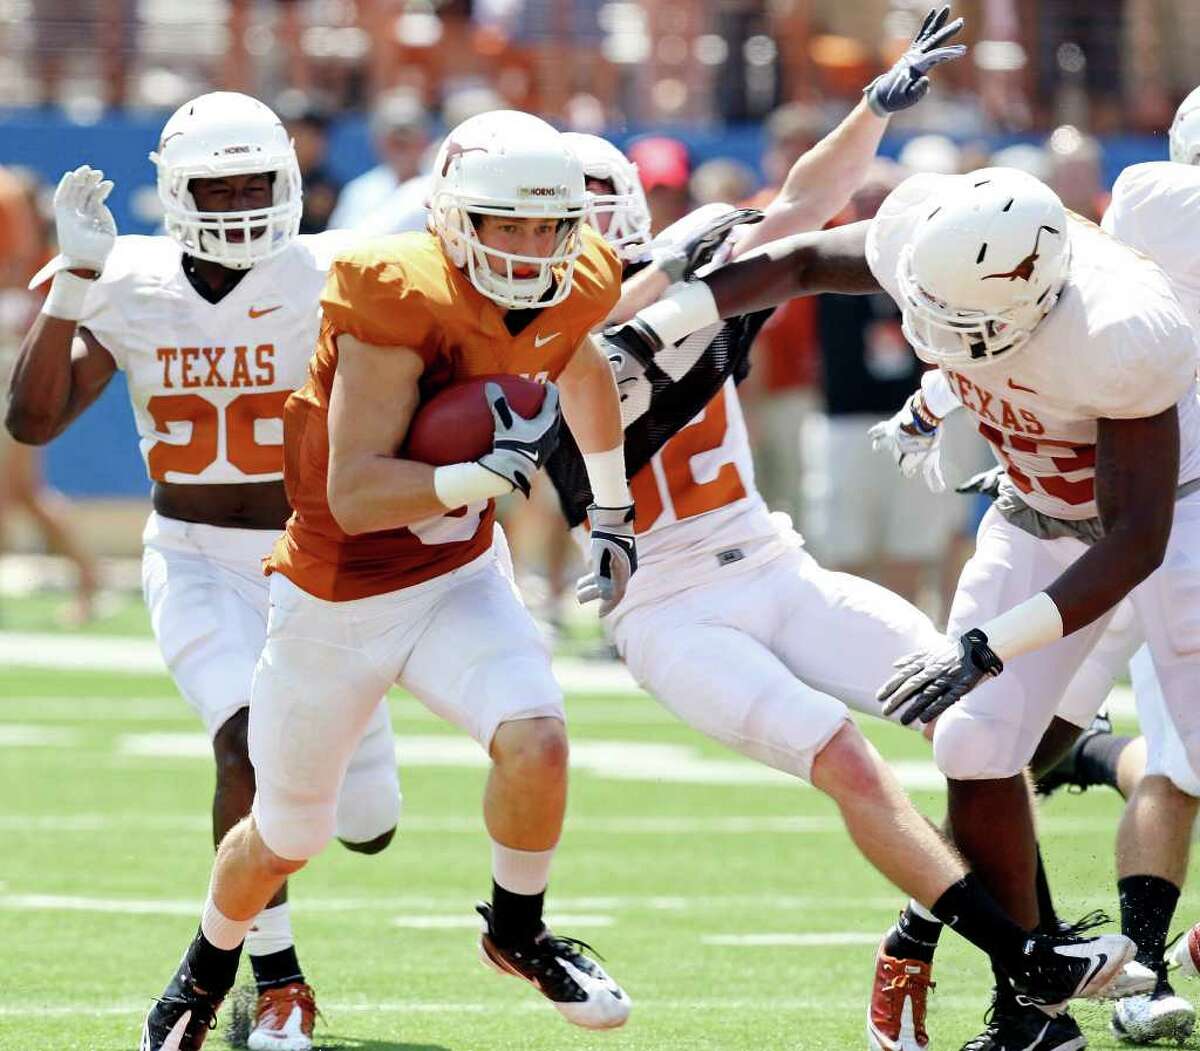 Receiver Jaxon Shipley (second from left), heading upfield in Texas’ spring game, may have outdone the QBs with a 54-yard TD toss to D.J. Grant.